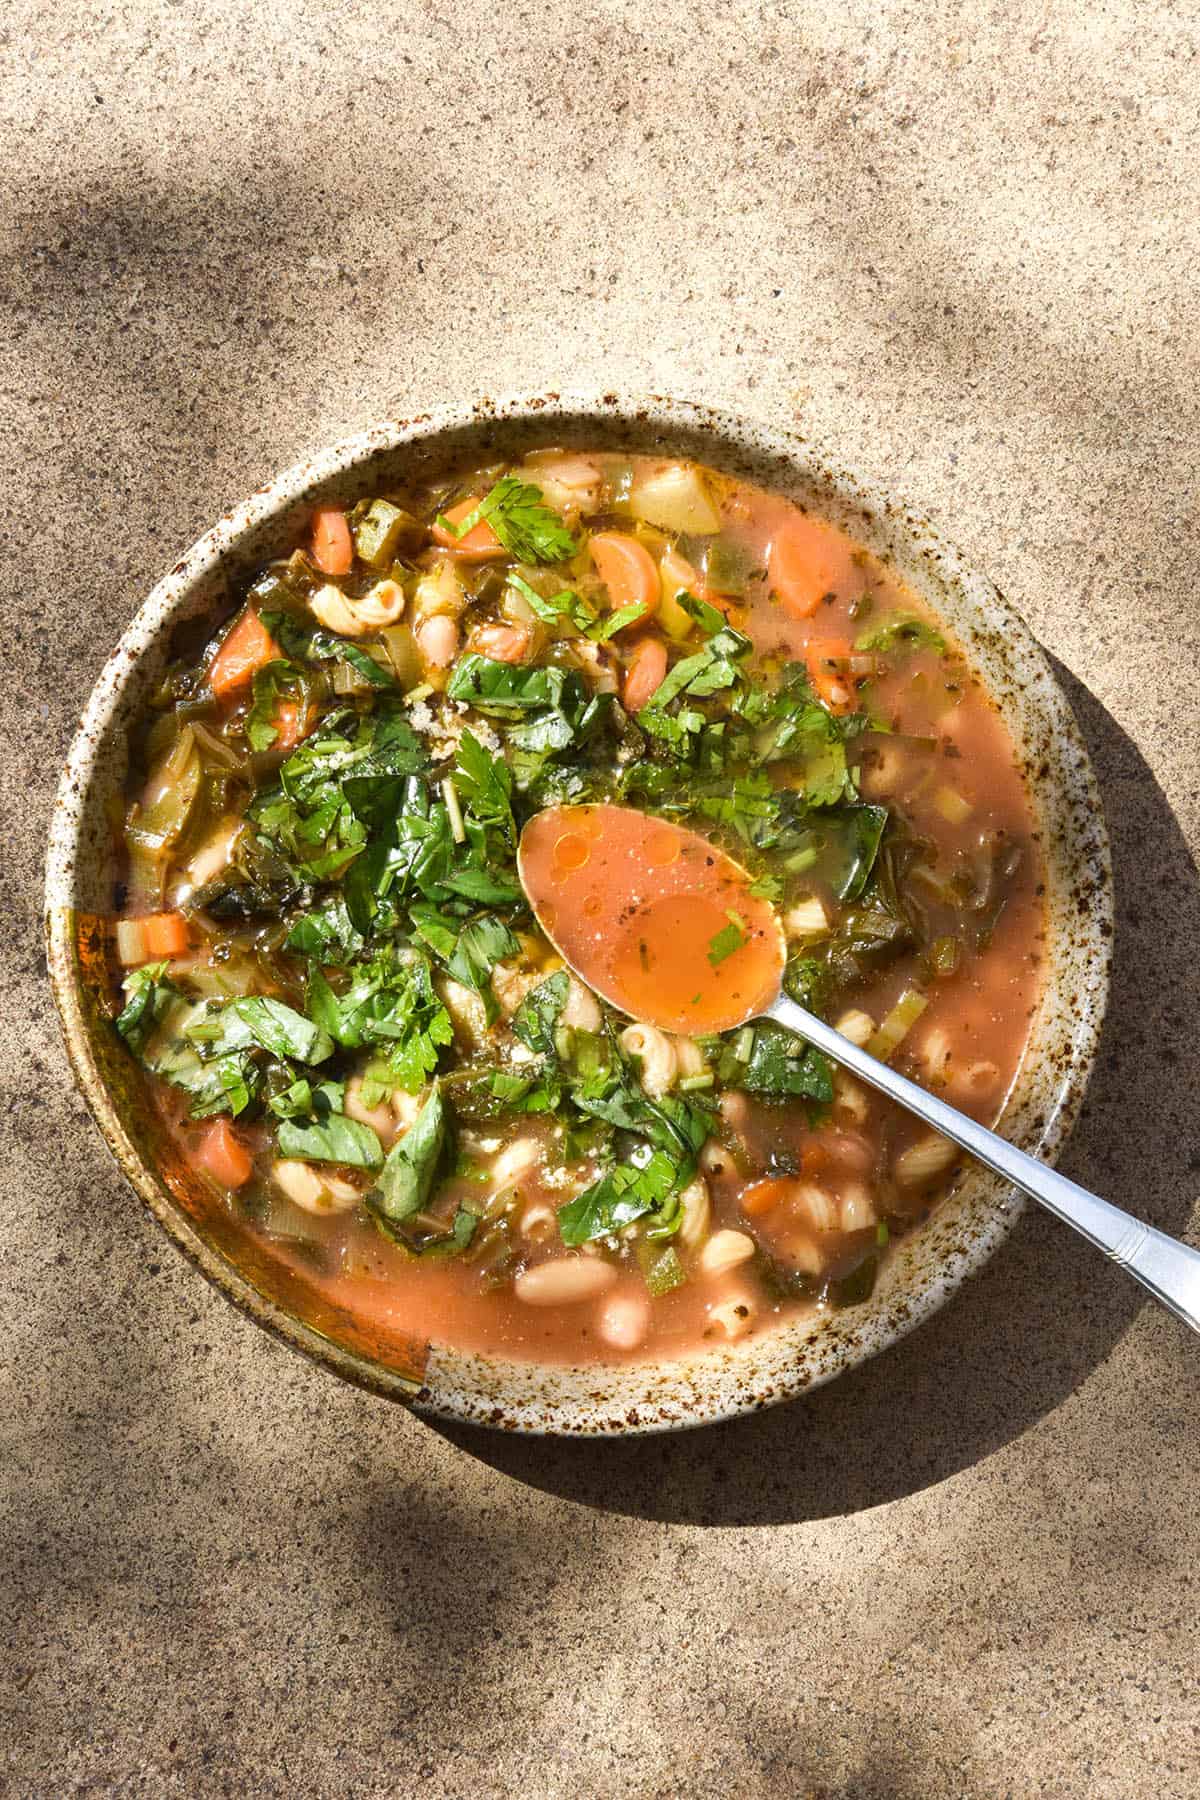 An aerial image of a beige speckled ceramic bowl of low FODMAP minestrone sitting on a stone backdrop in dappled sunlight. The minestrone is topped with herbs and garlic infused olive oil. A spoon dips into the minestrone from the bottom right hand side of the image